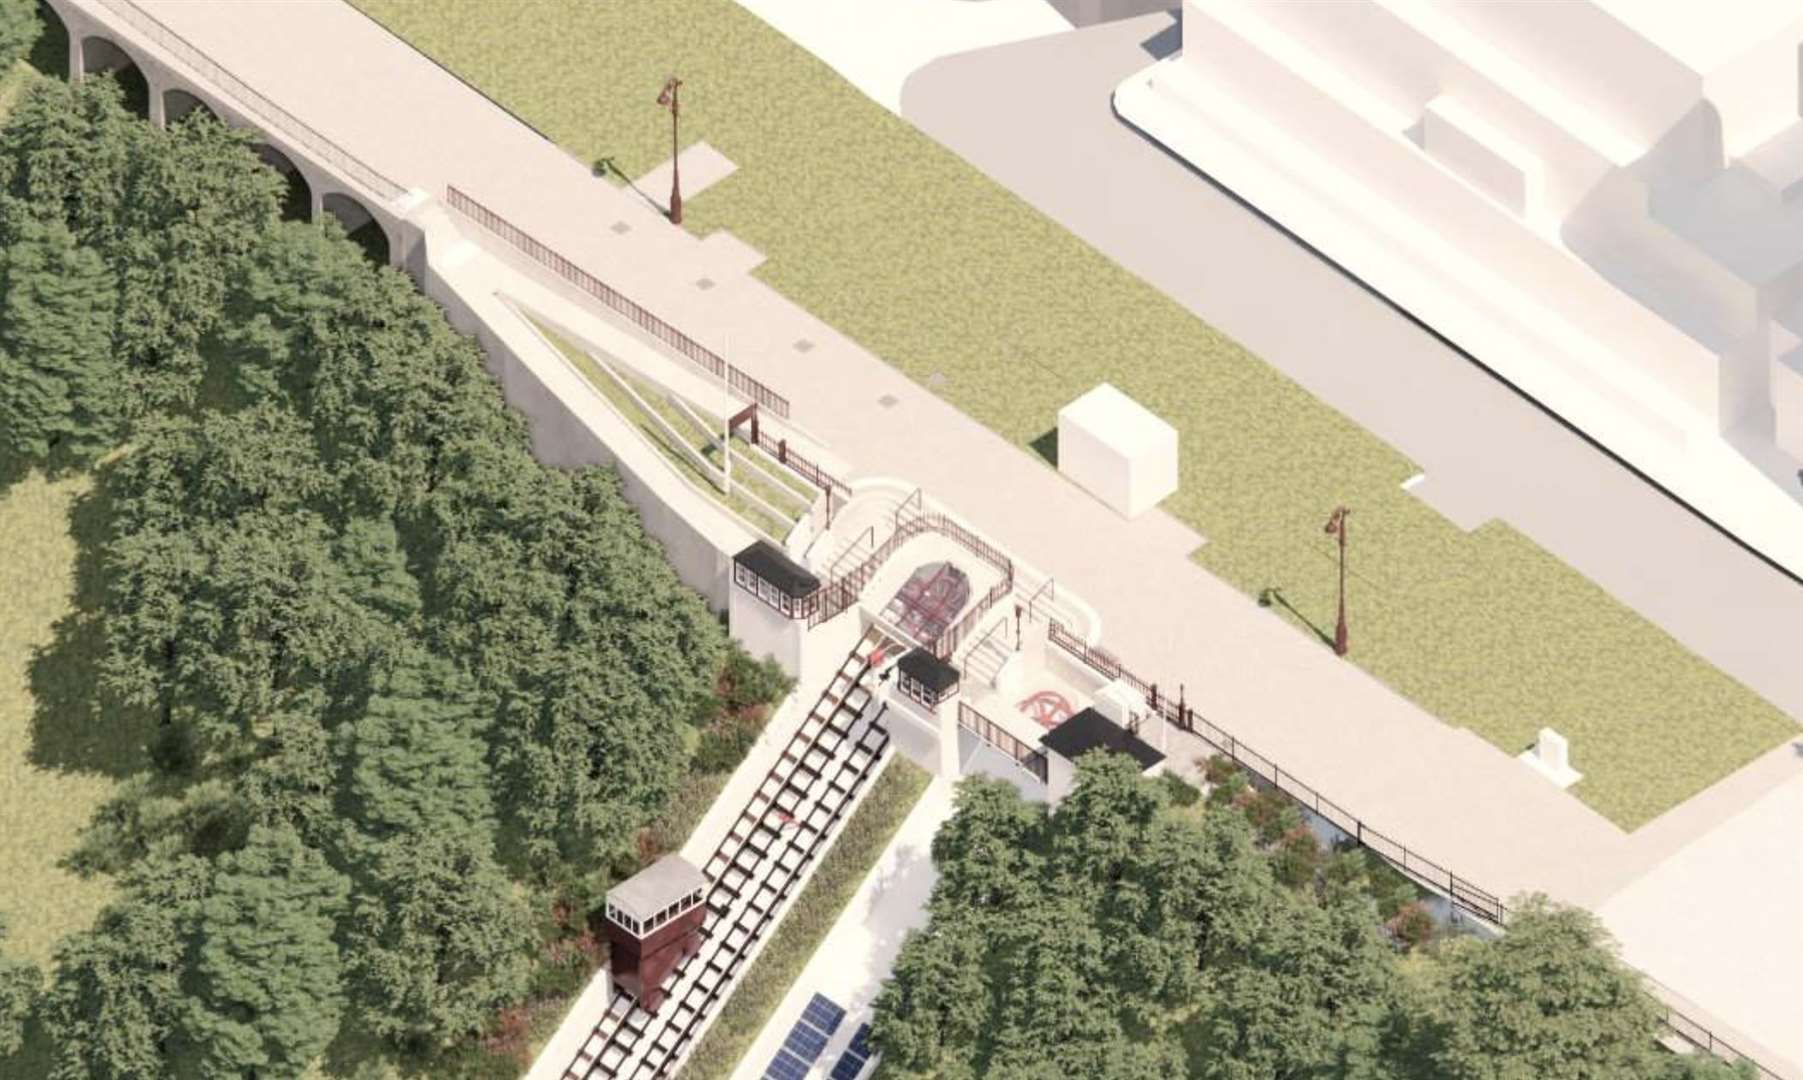 The lift would link the Leas to the Shoreline housing development on the seafront. Photo: ACME/Leas Lift Folkestone